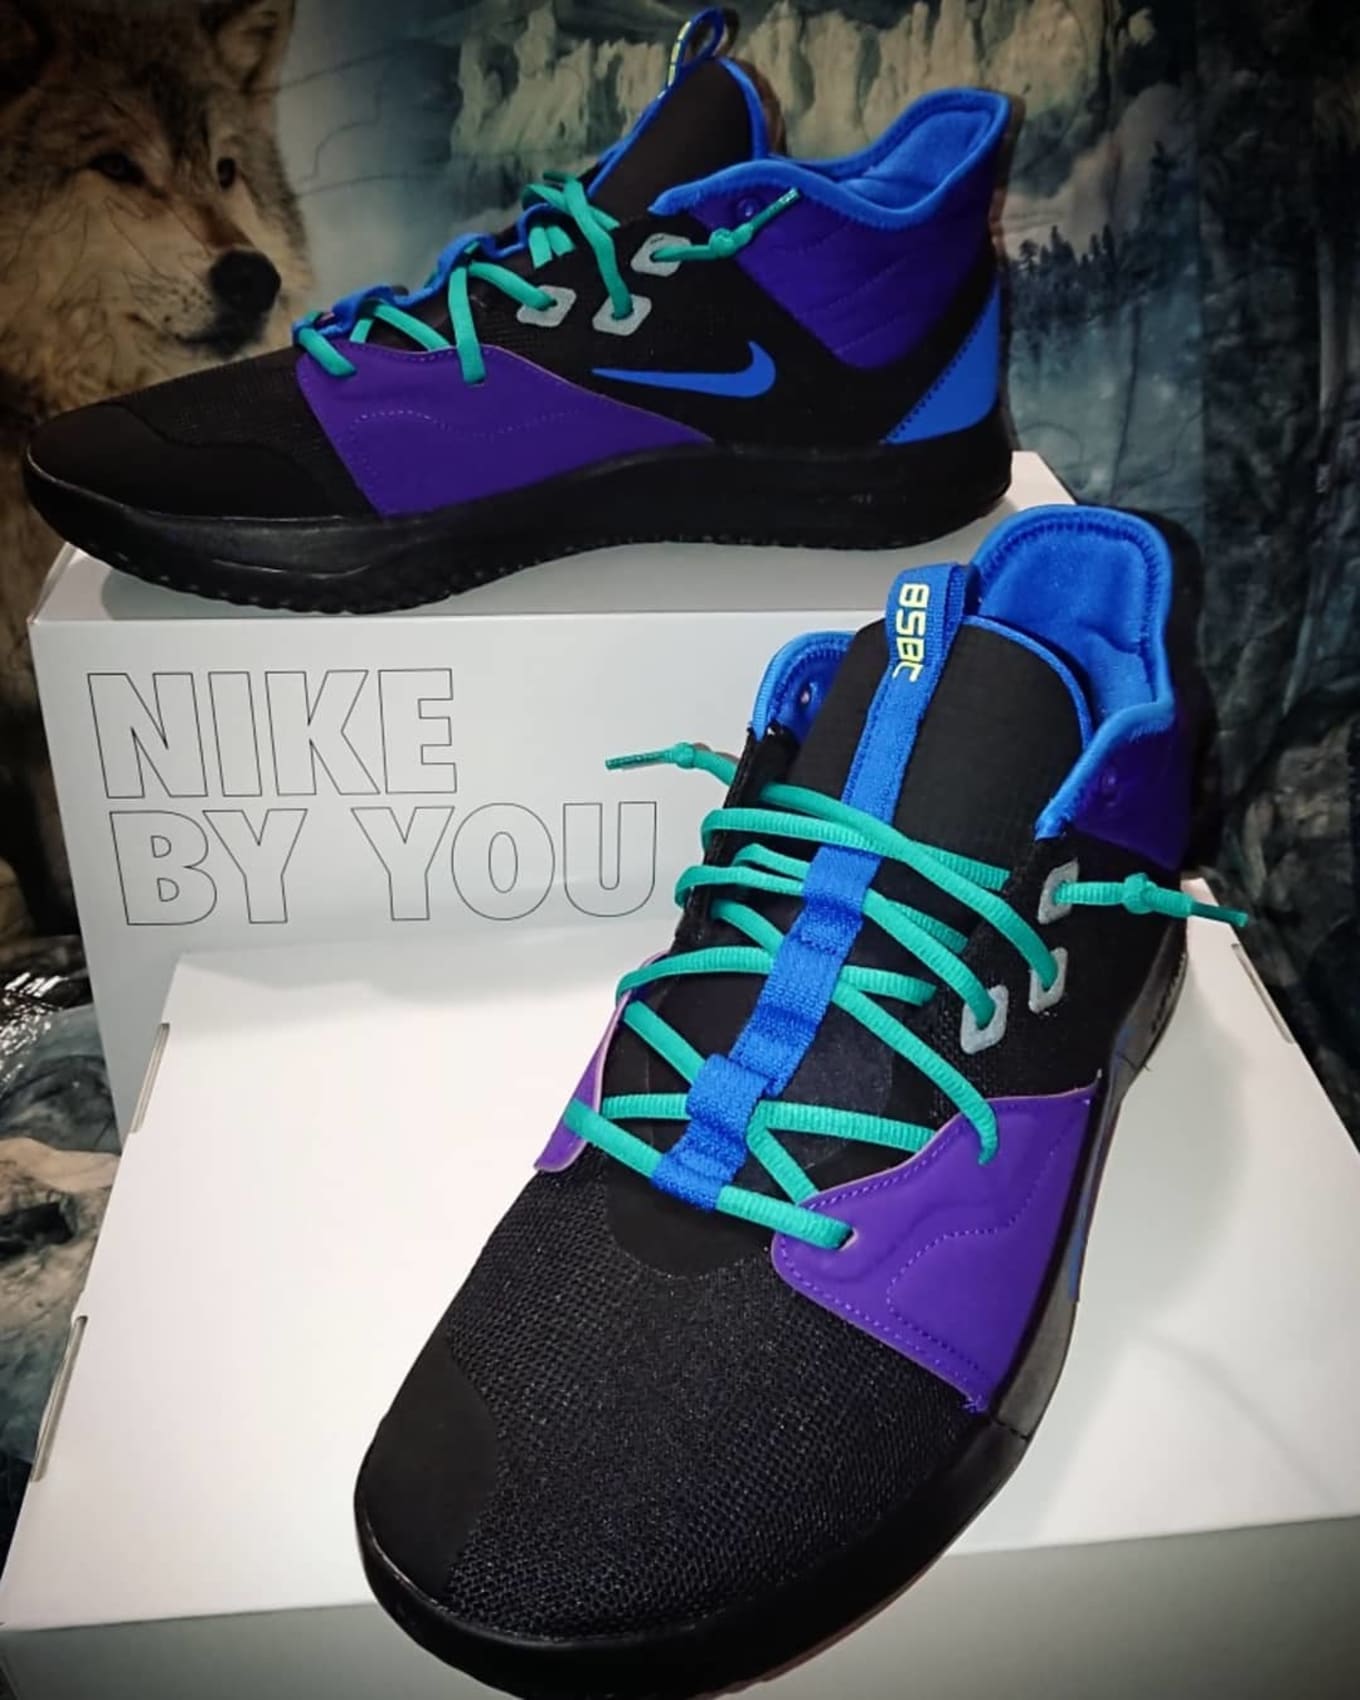 nike pg 3 by you